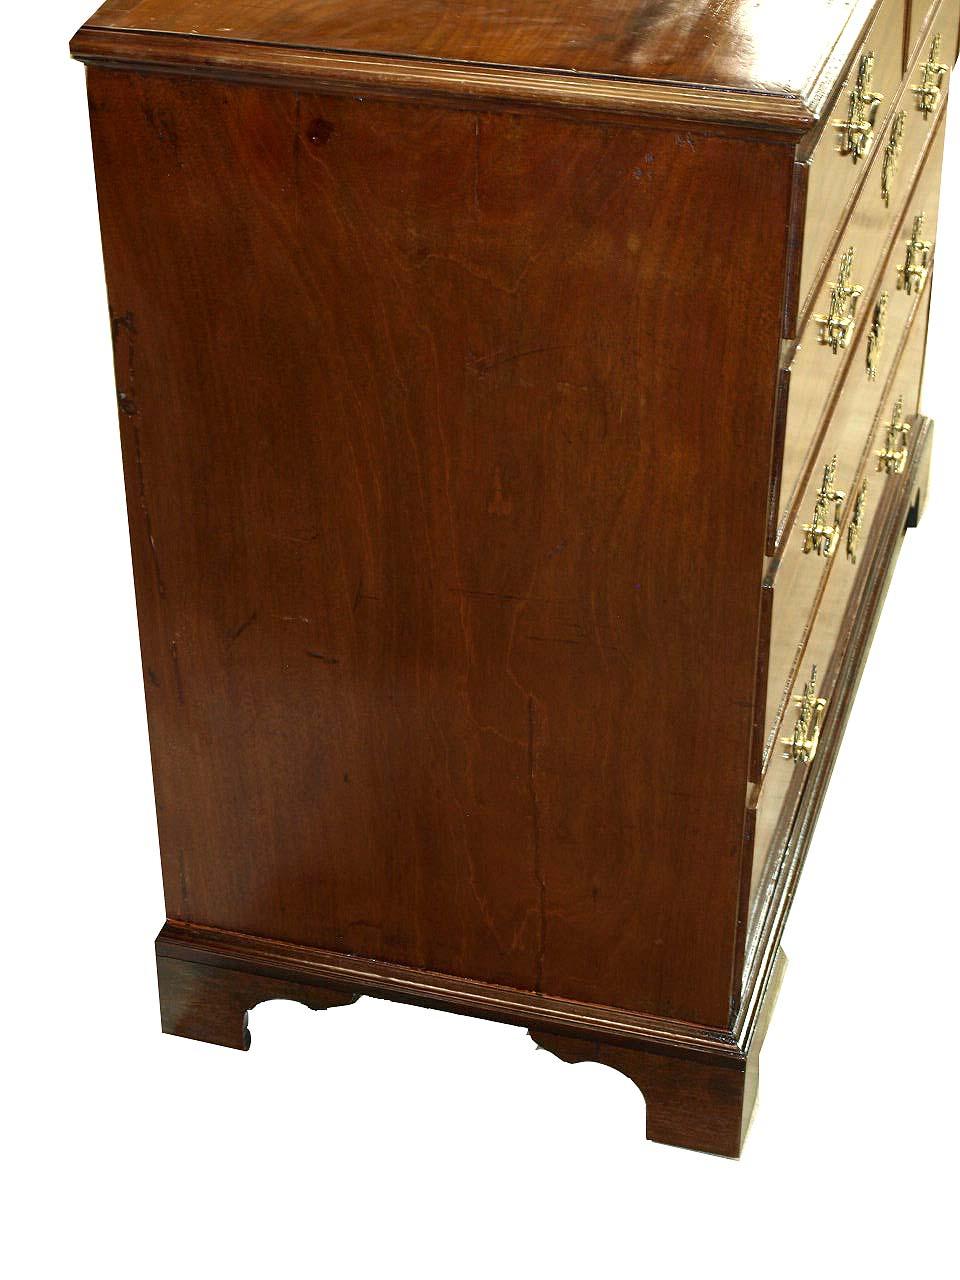 English mahogany five drawer chest, the top with beautiful figured grain and cross banded along the back edge with mahogany (see photo), the two over three graduated drawers with open fretwork brass pulls and escutcheons. The chest rests on bracket